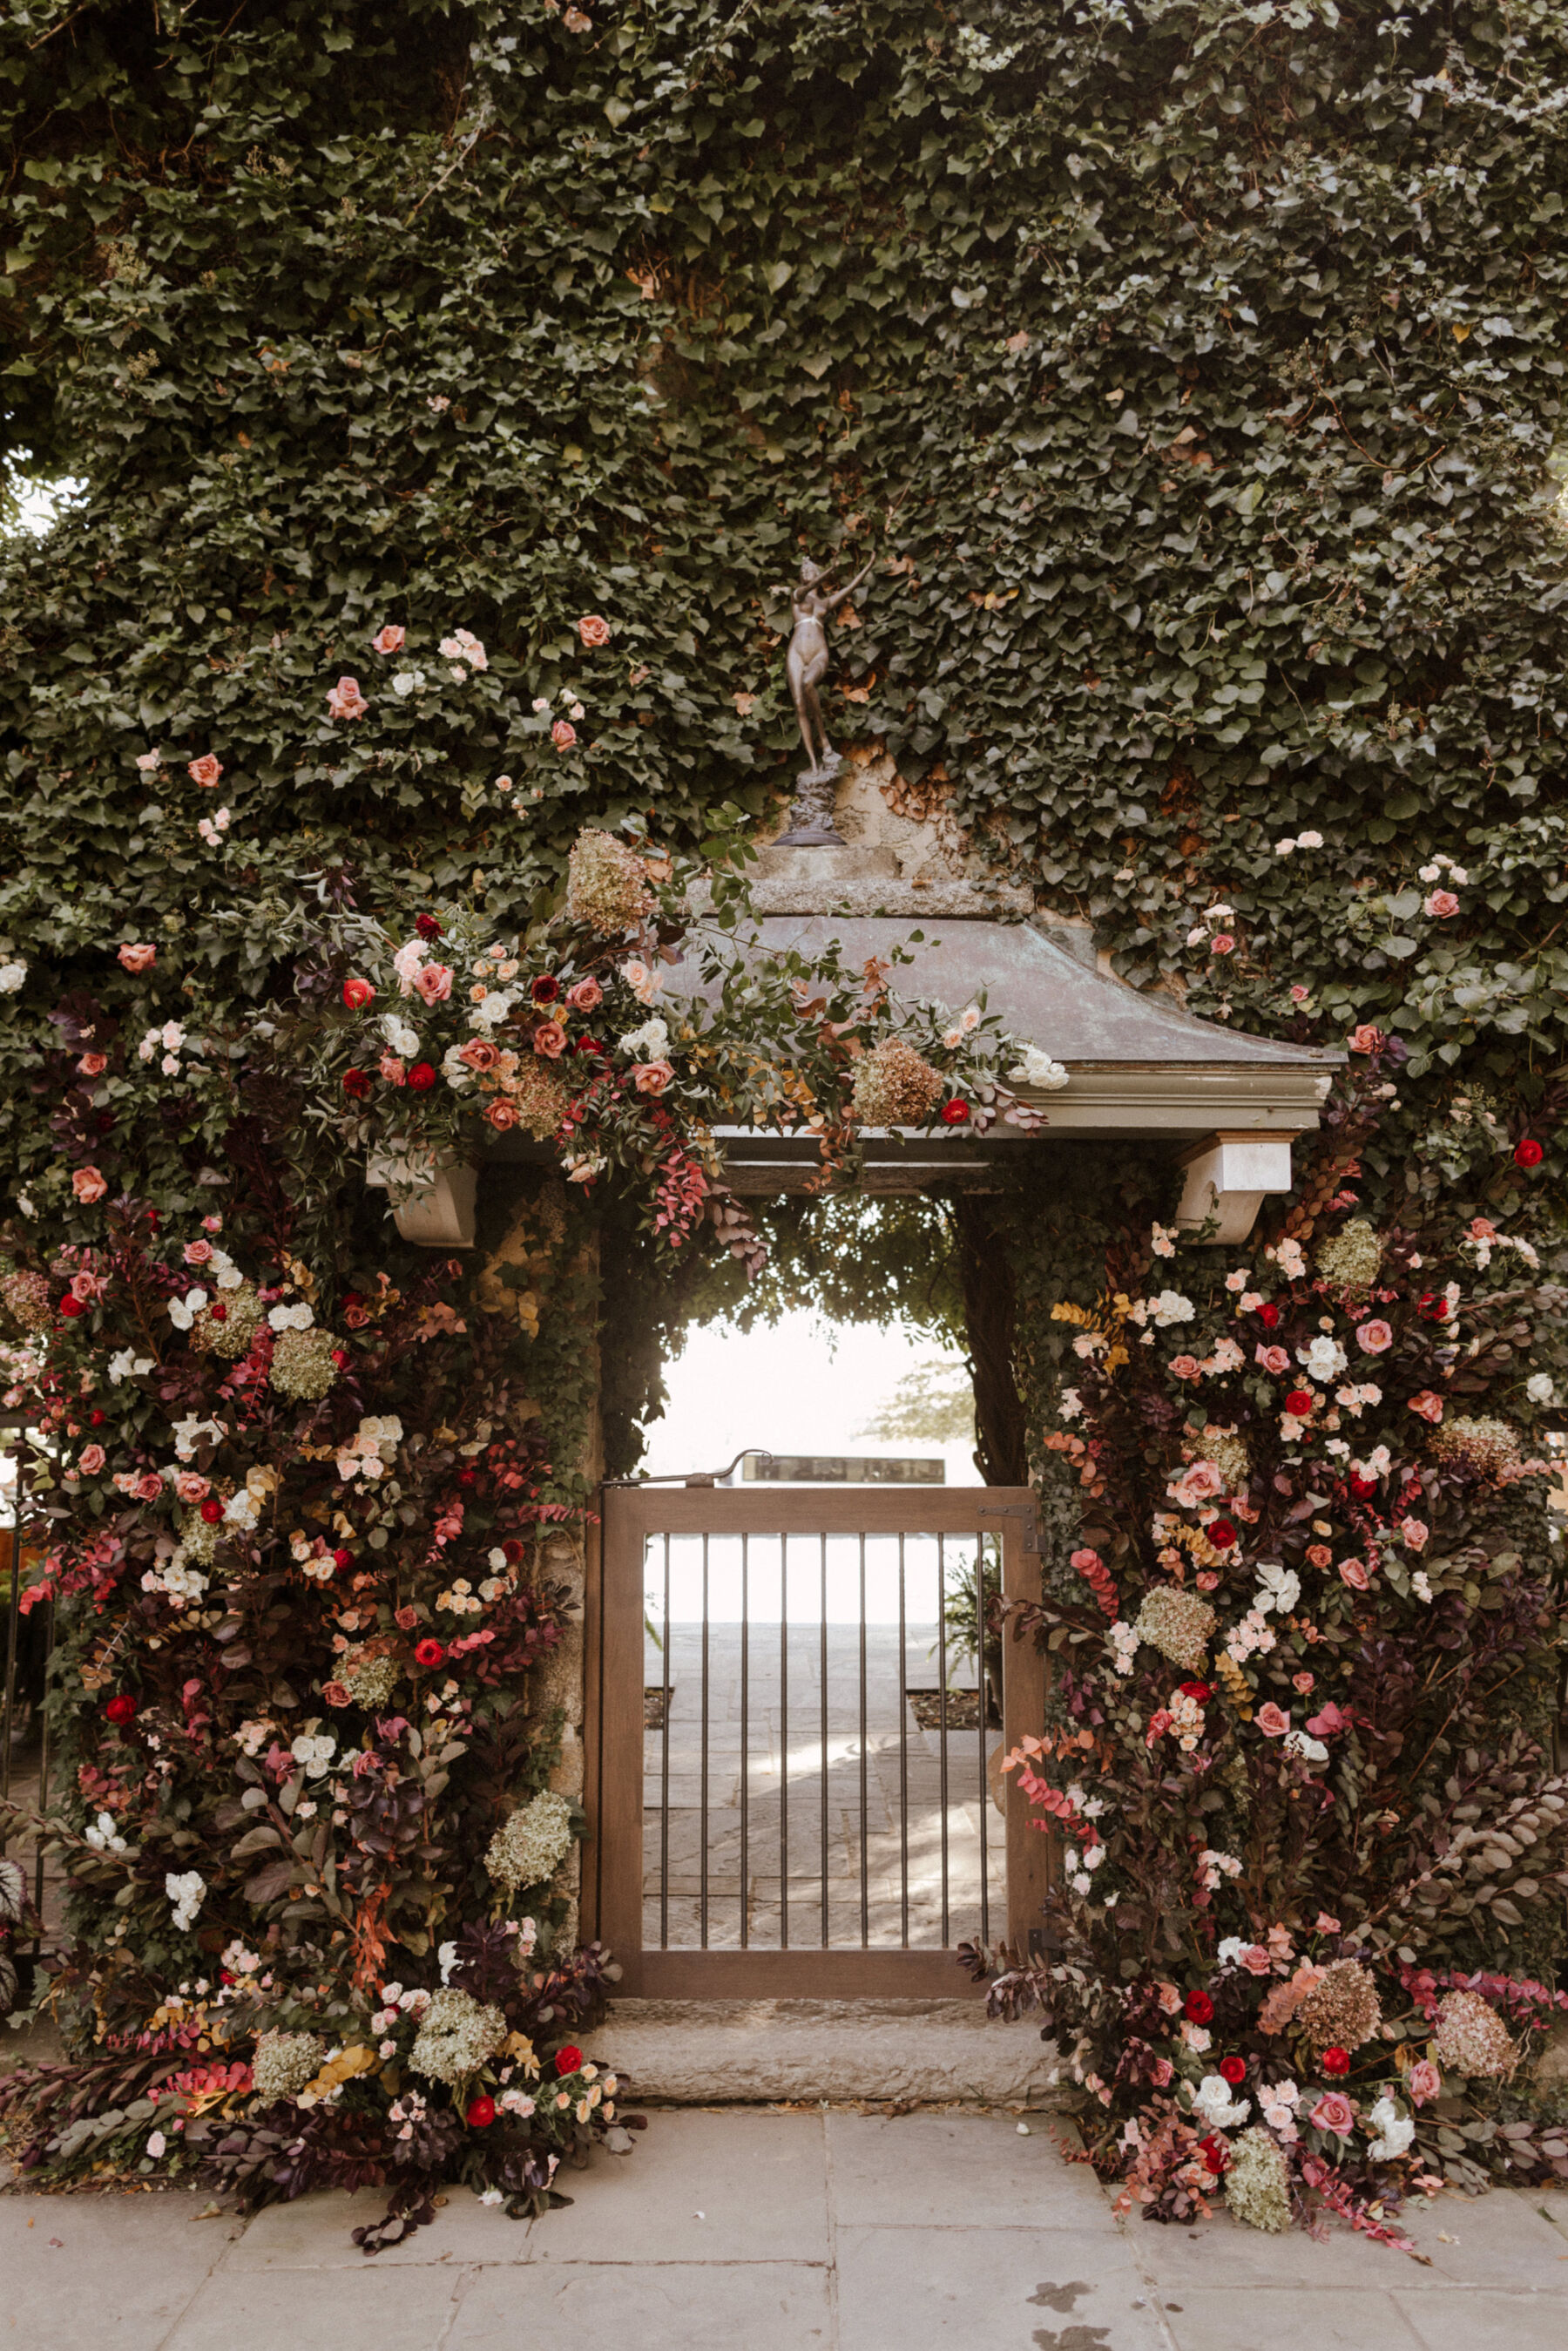 Autumn wedding flowers forming a floral arch.